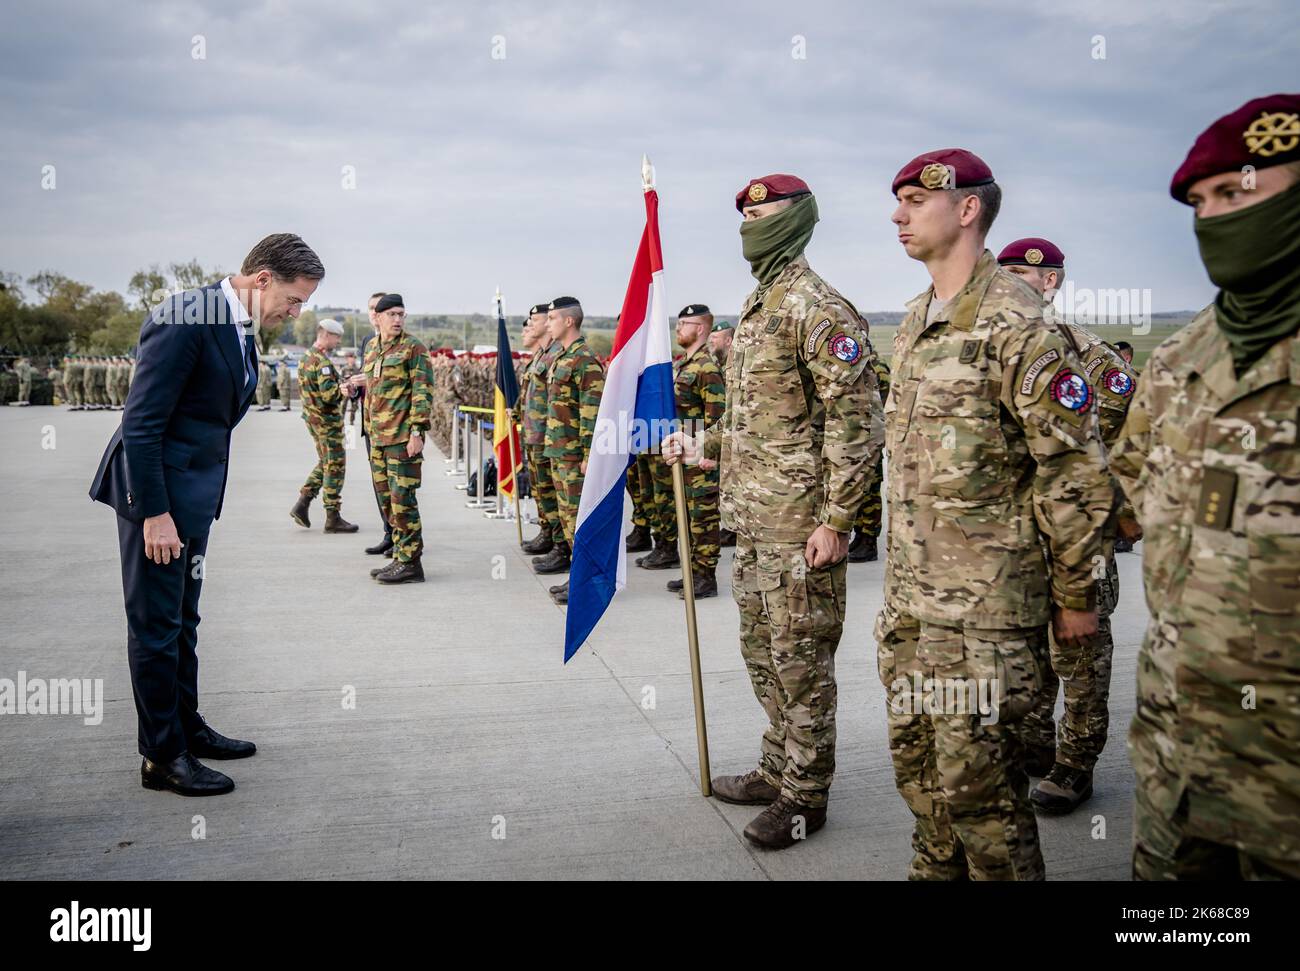 2022-10-12 16:35:25 CINCU - Prime Minister Mark Rutte, bows to Dutch  soldiers, at a military base where Dutch troops are stationed, during a  visit to Romania. The prime minister discusses, among other